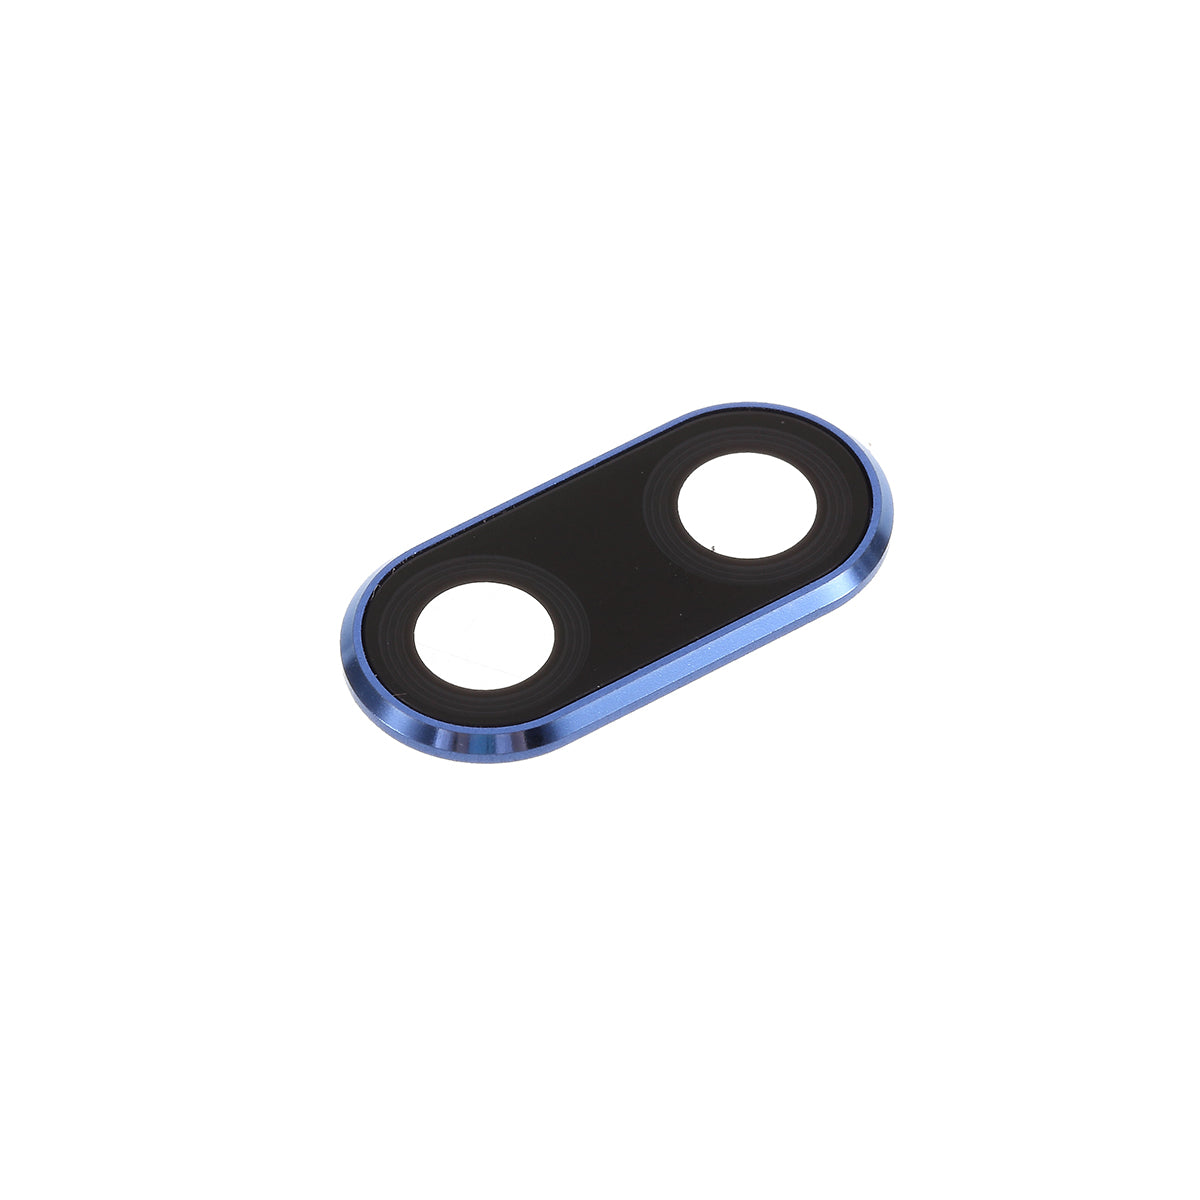 For Huawei Honor 10 OEM Rear Camera Lens Ring Cover Replacement Part - Blue